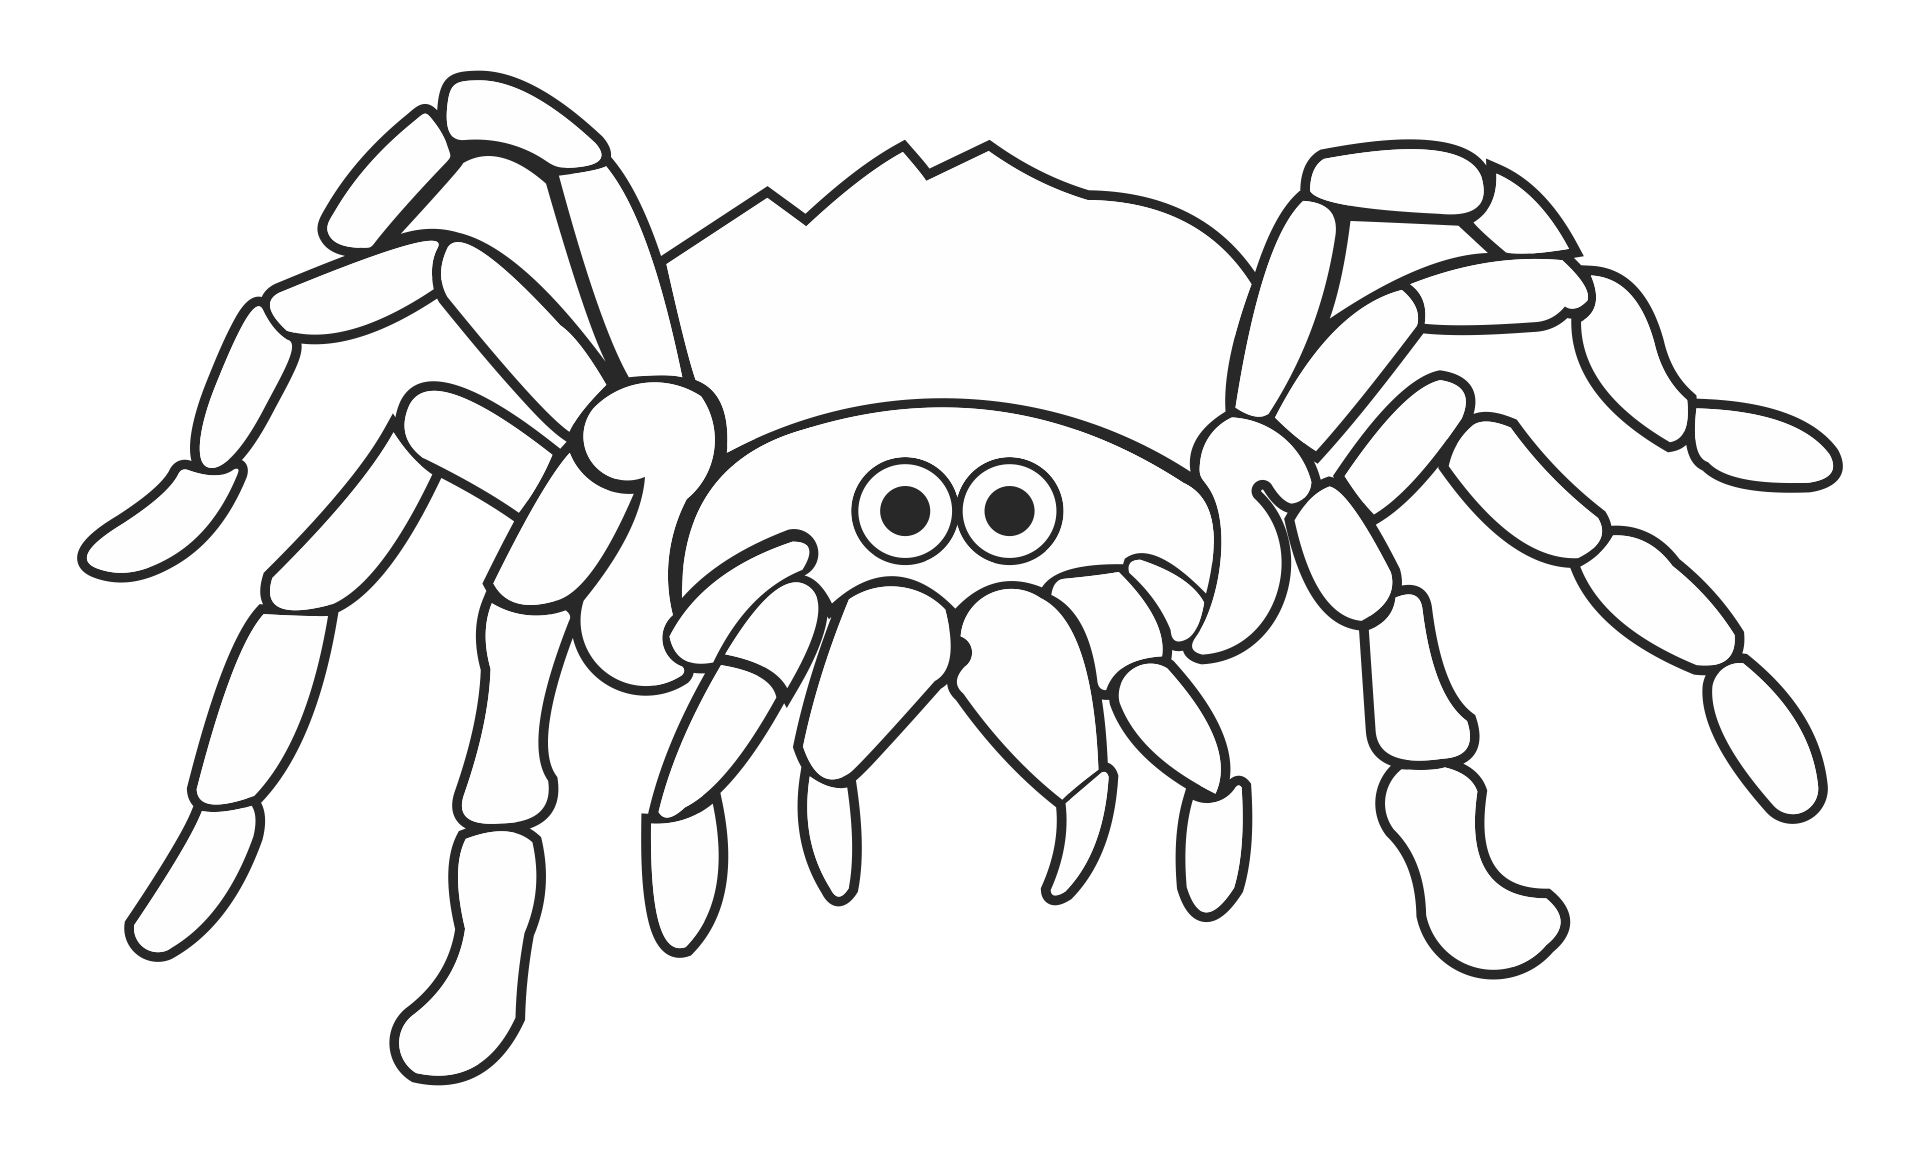 15 Best Printable Halloween Spider Coloring Pages PDF for Free at ...